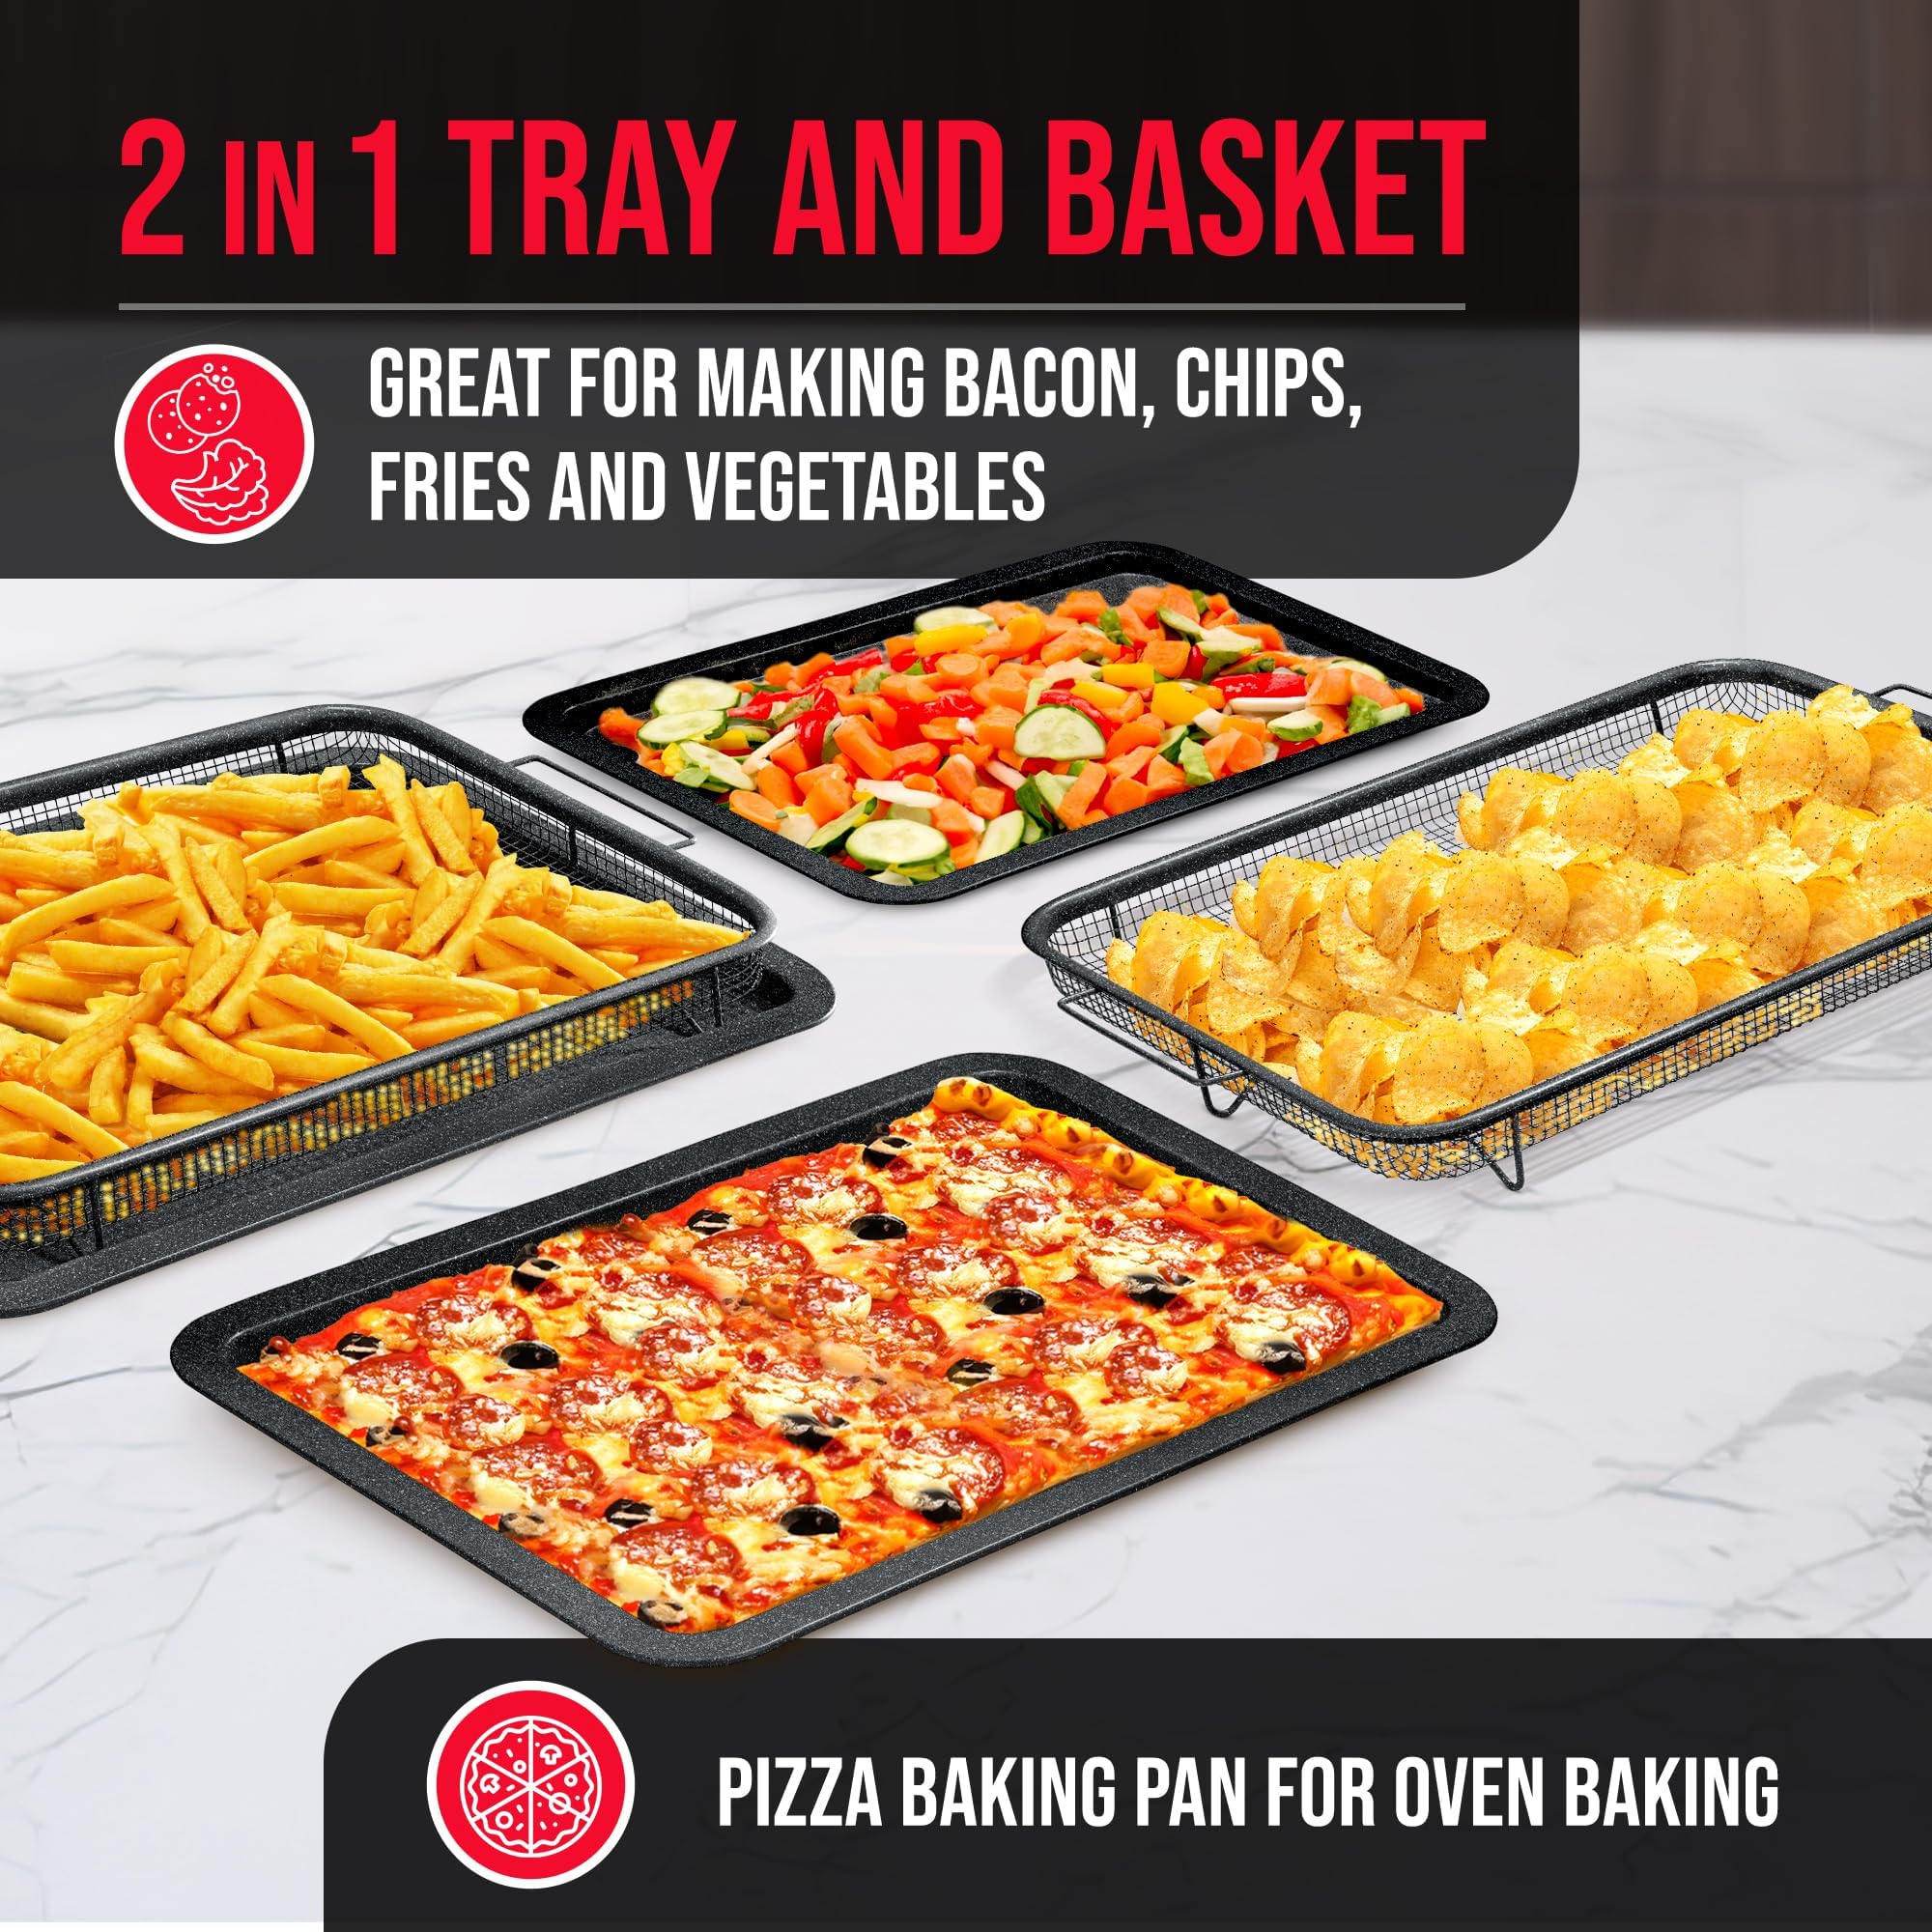 Bakken Swiss Crisper Tray - 2-Piece Set – Gray Marble, Non-Stick Basket Design for Healthier Cooking in Regular Ovens - Achieve Perfectly Crispy Chips, Bacon and More